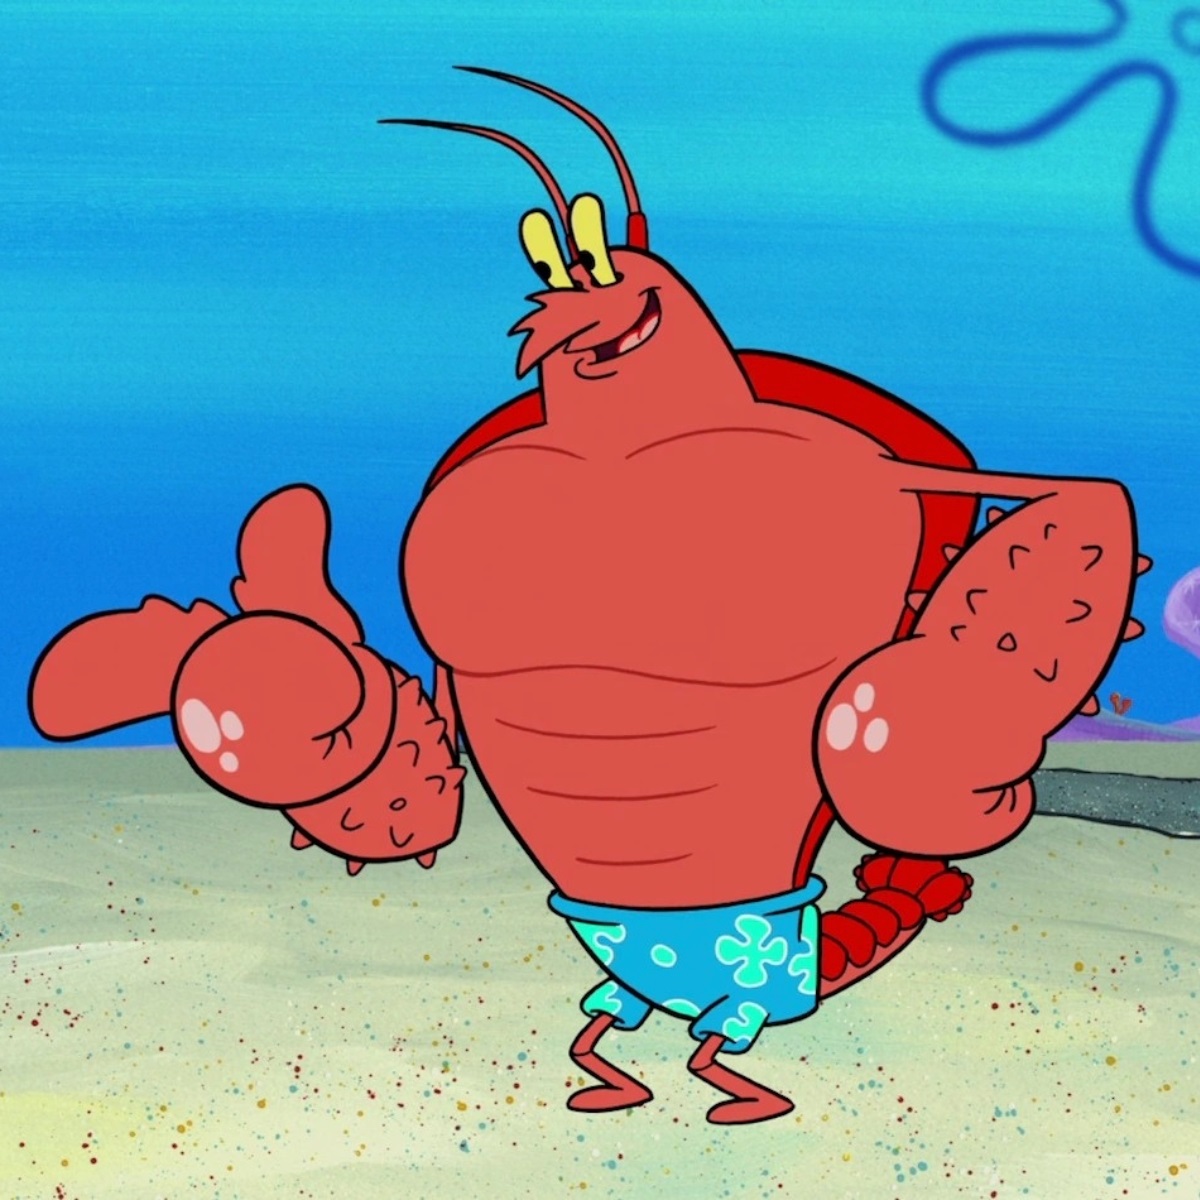 21-facts-about-larry-the-lobster-spongebob-squarepants